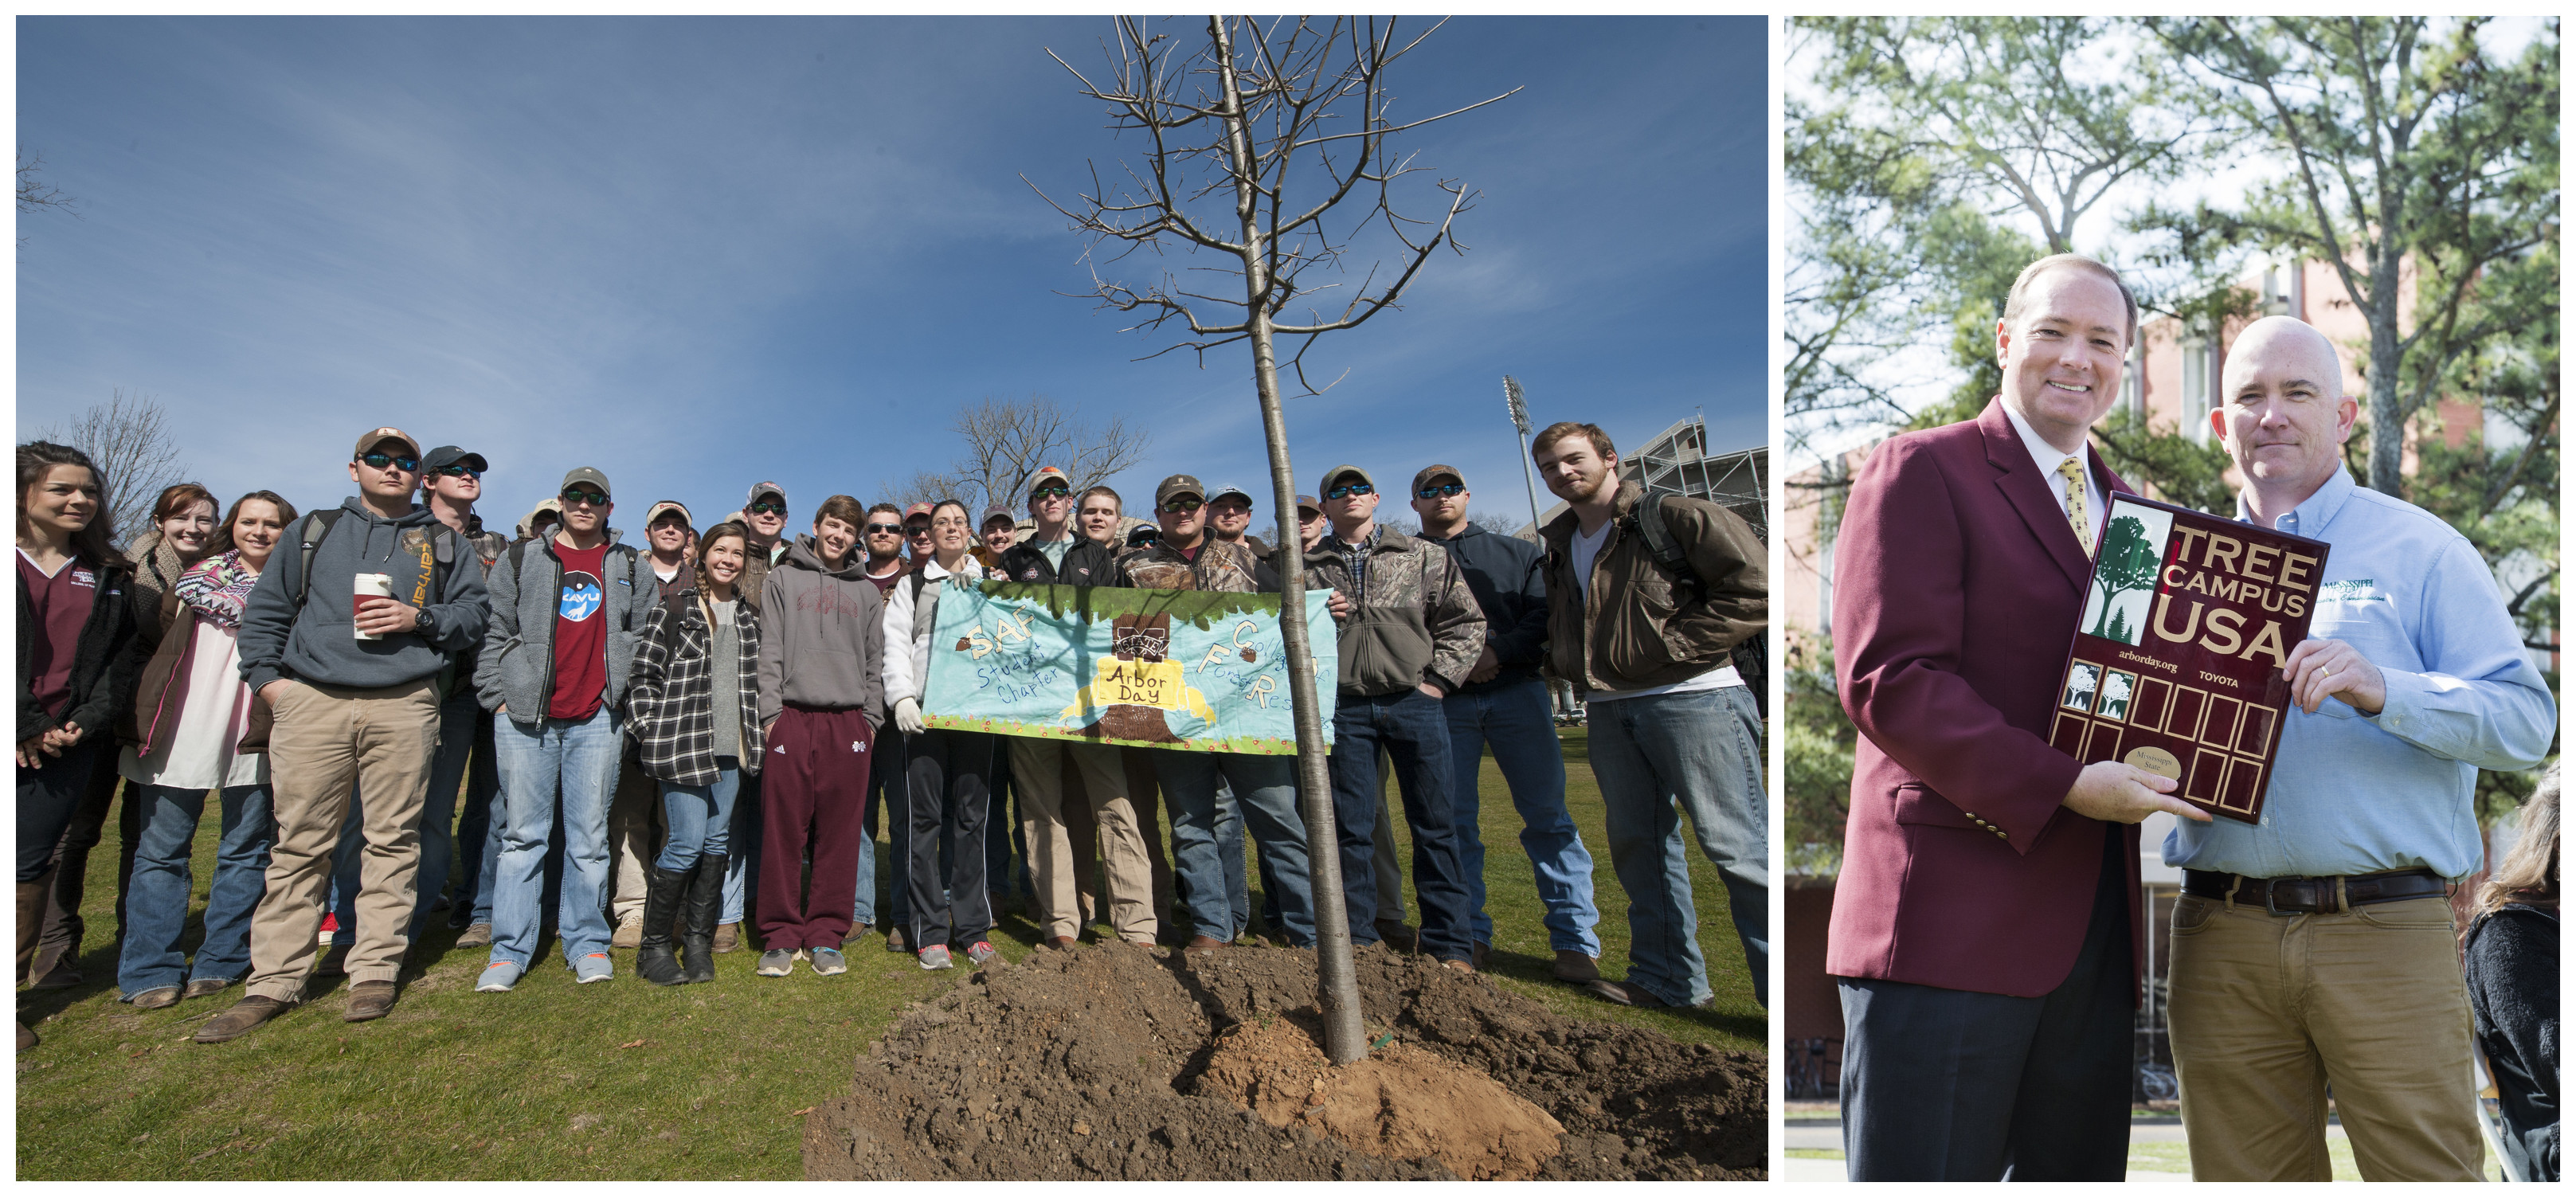 Left: Members of the university's student chapter of the Society of American Foresters planted an oak tree during the Feb. 13 Arbor Day celebration. Right: MSU President Mark E. Keenum, left, received a plaque from Todd Matthews, urban forestry coordinator with the Mississippi Forestry Commission, in recognition of the university's designation as a Tree Campus USA campus by the Arbor Day Foundation.